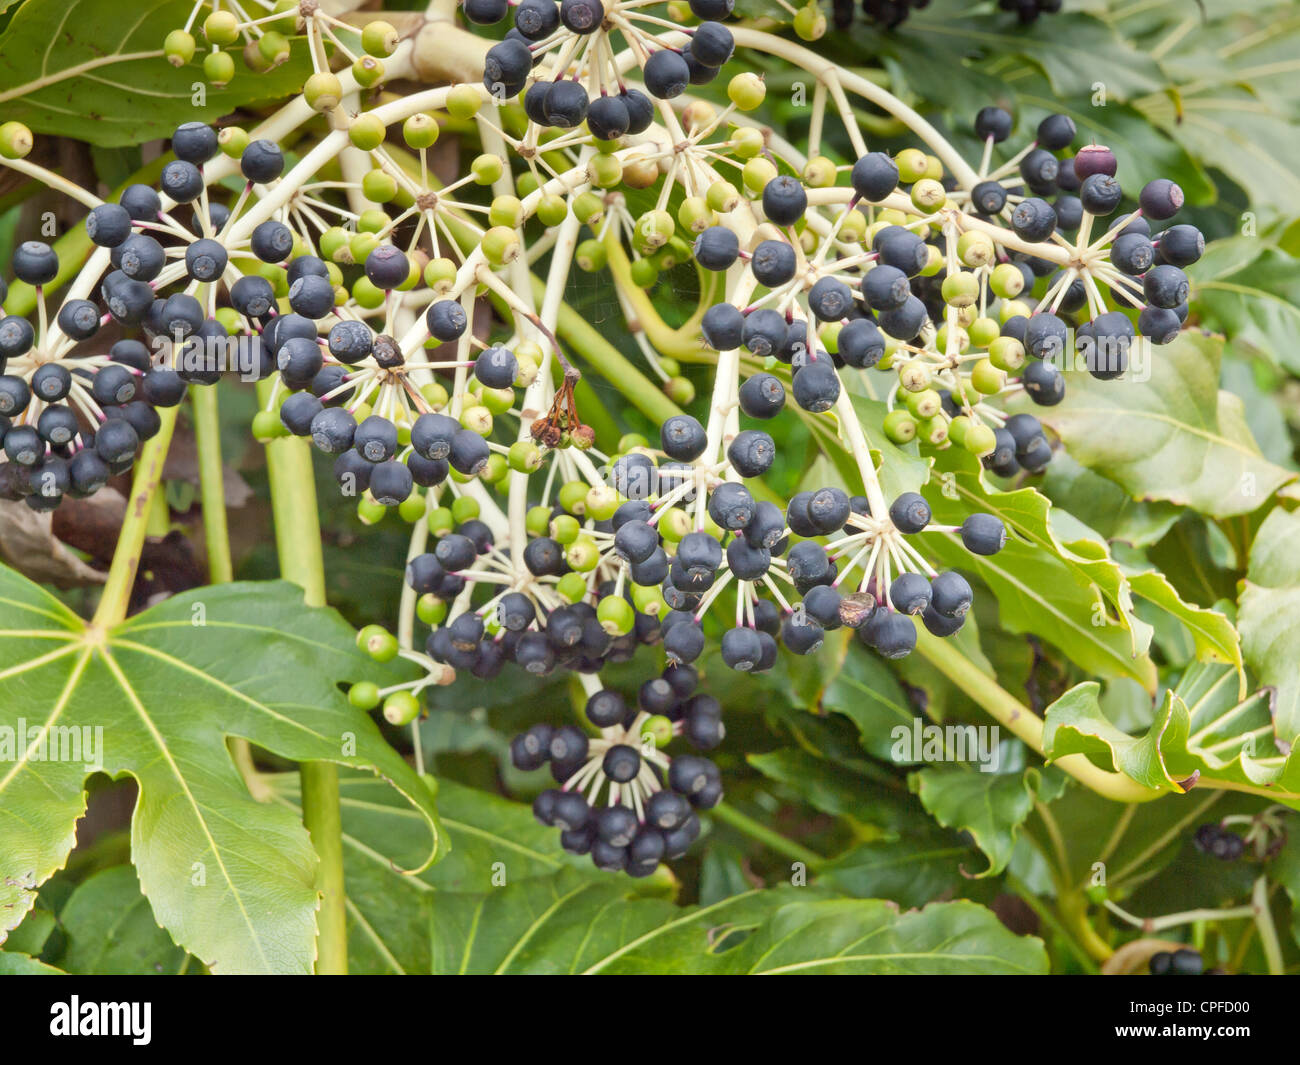 Fruit berries on a Fatsia japonica (Fatsi) or Japanese Aralia japonica grown as a decorative garden shrub in England Stock Photo